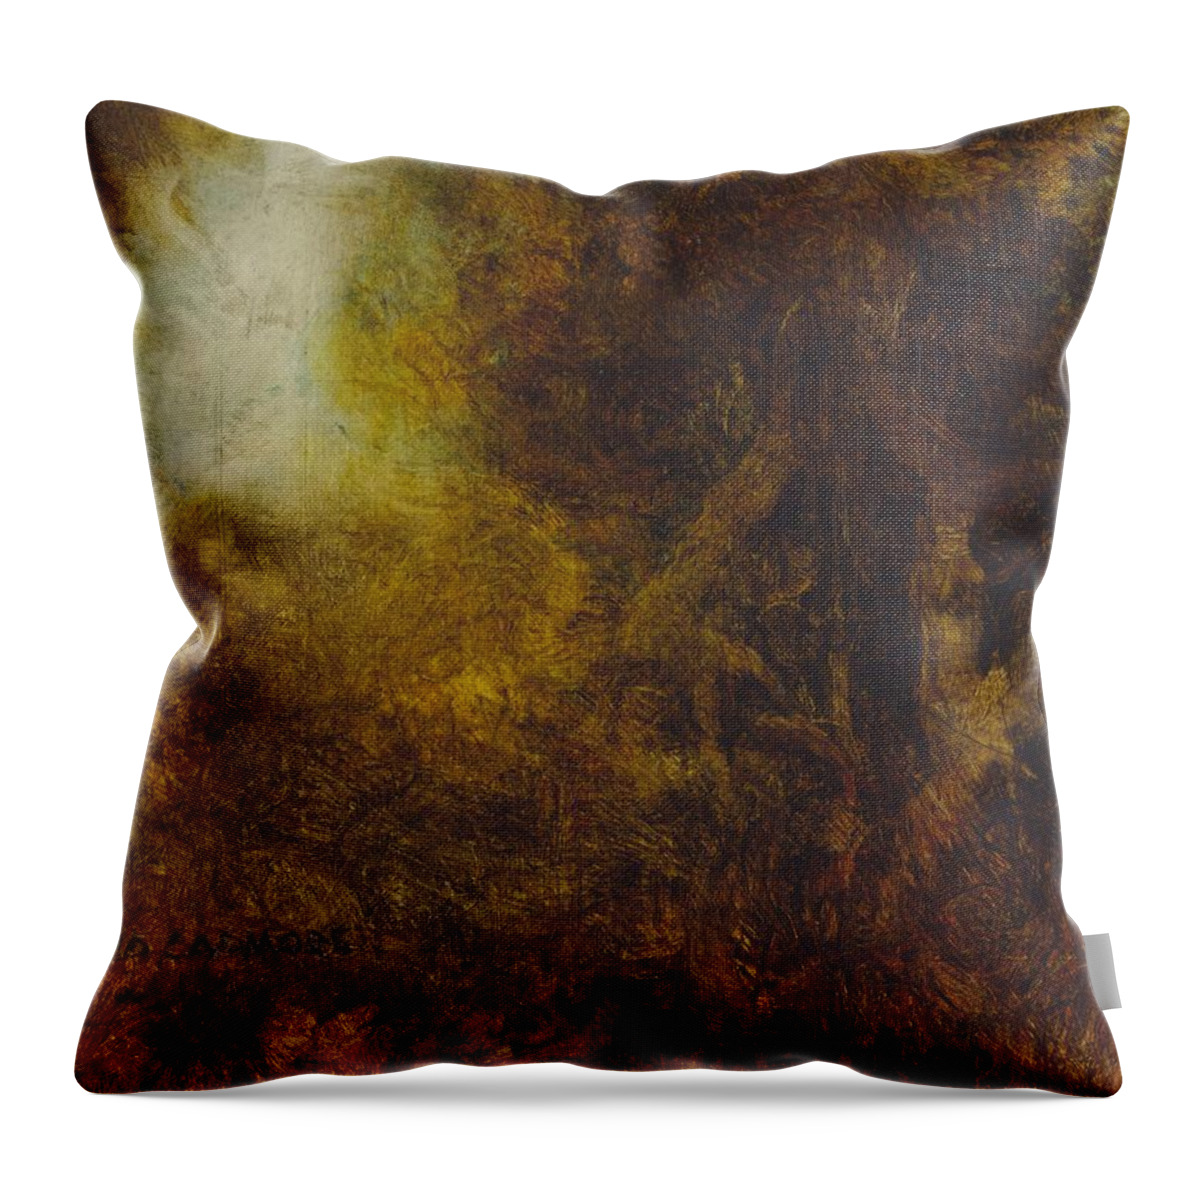 Warm Earth Throw Pillow featuring the painting Warm Earth 67 by David Ladmore